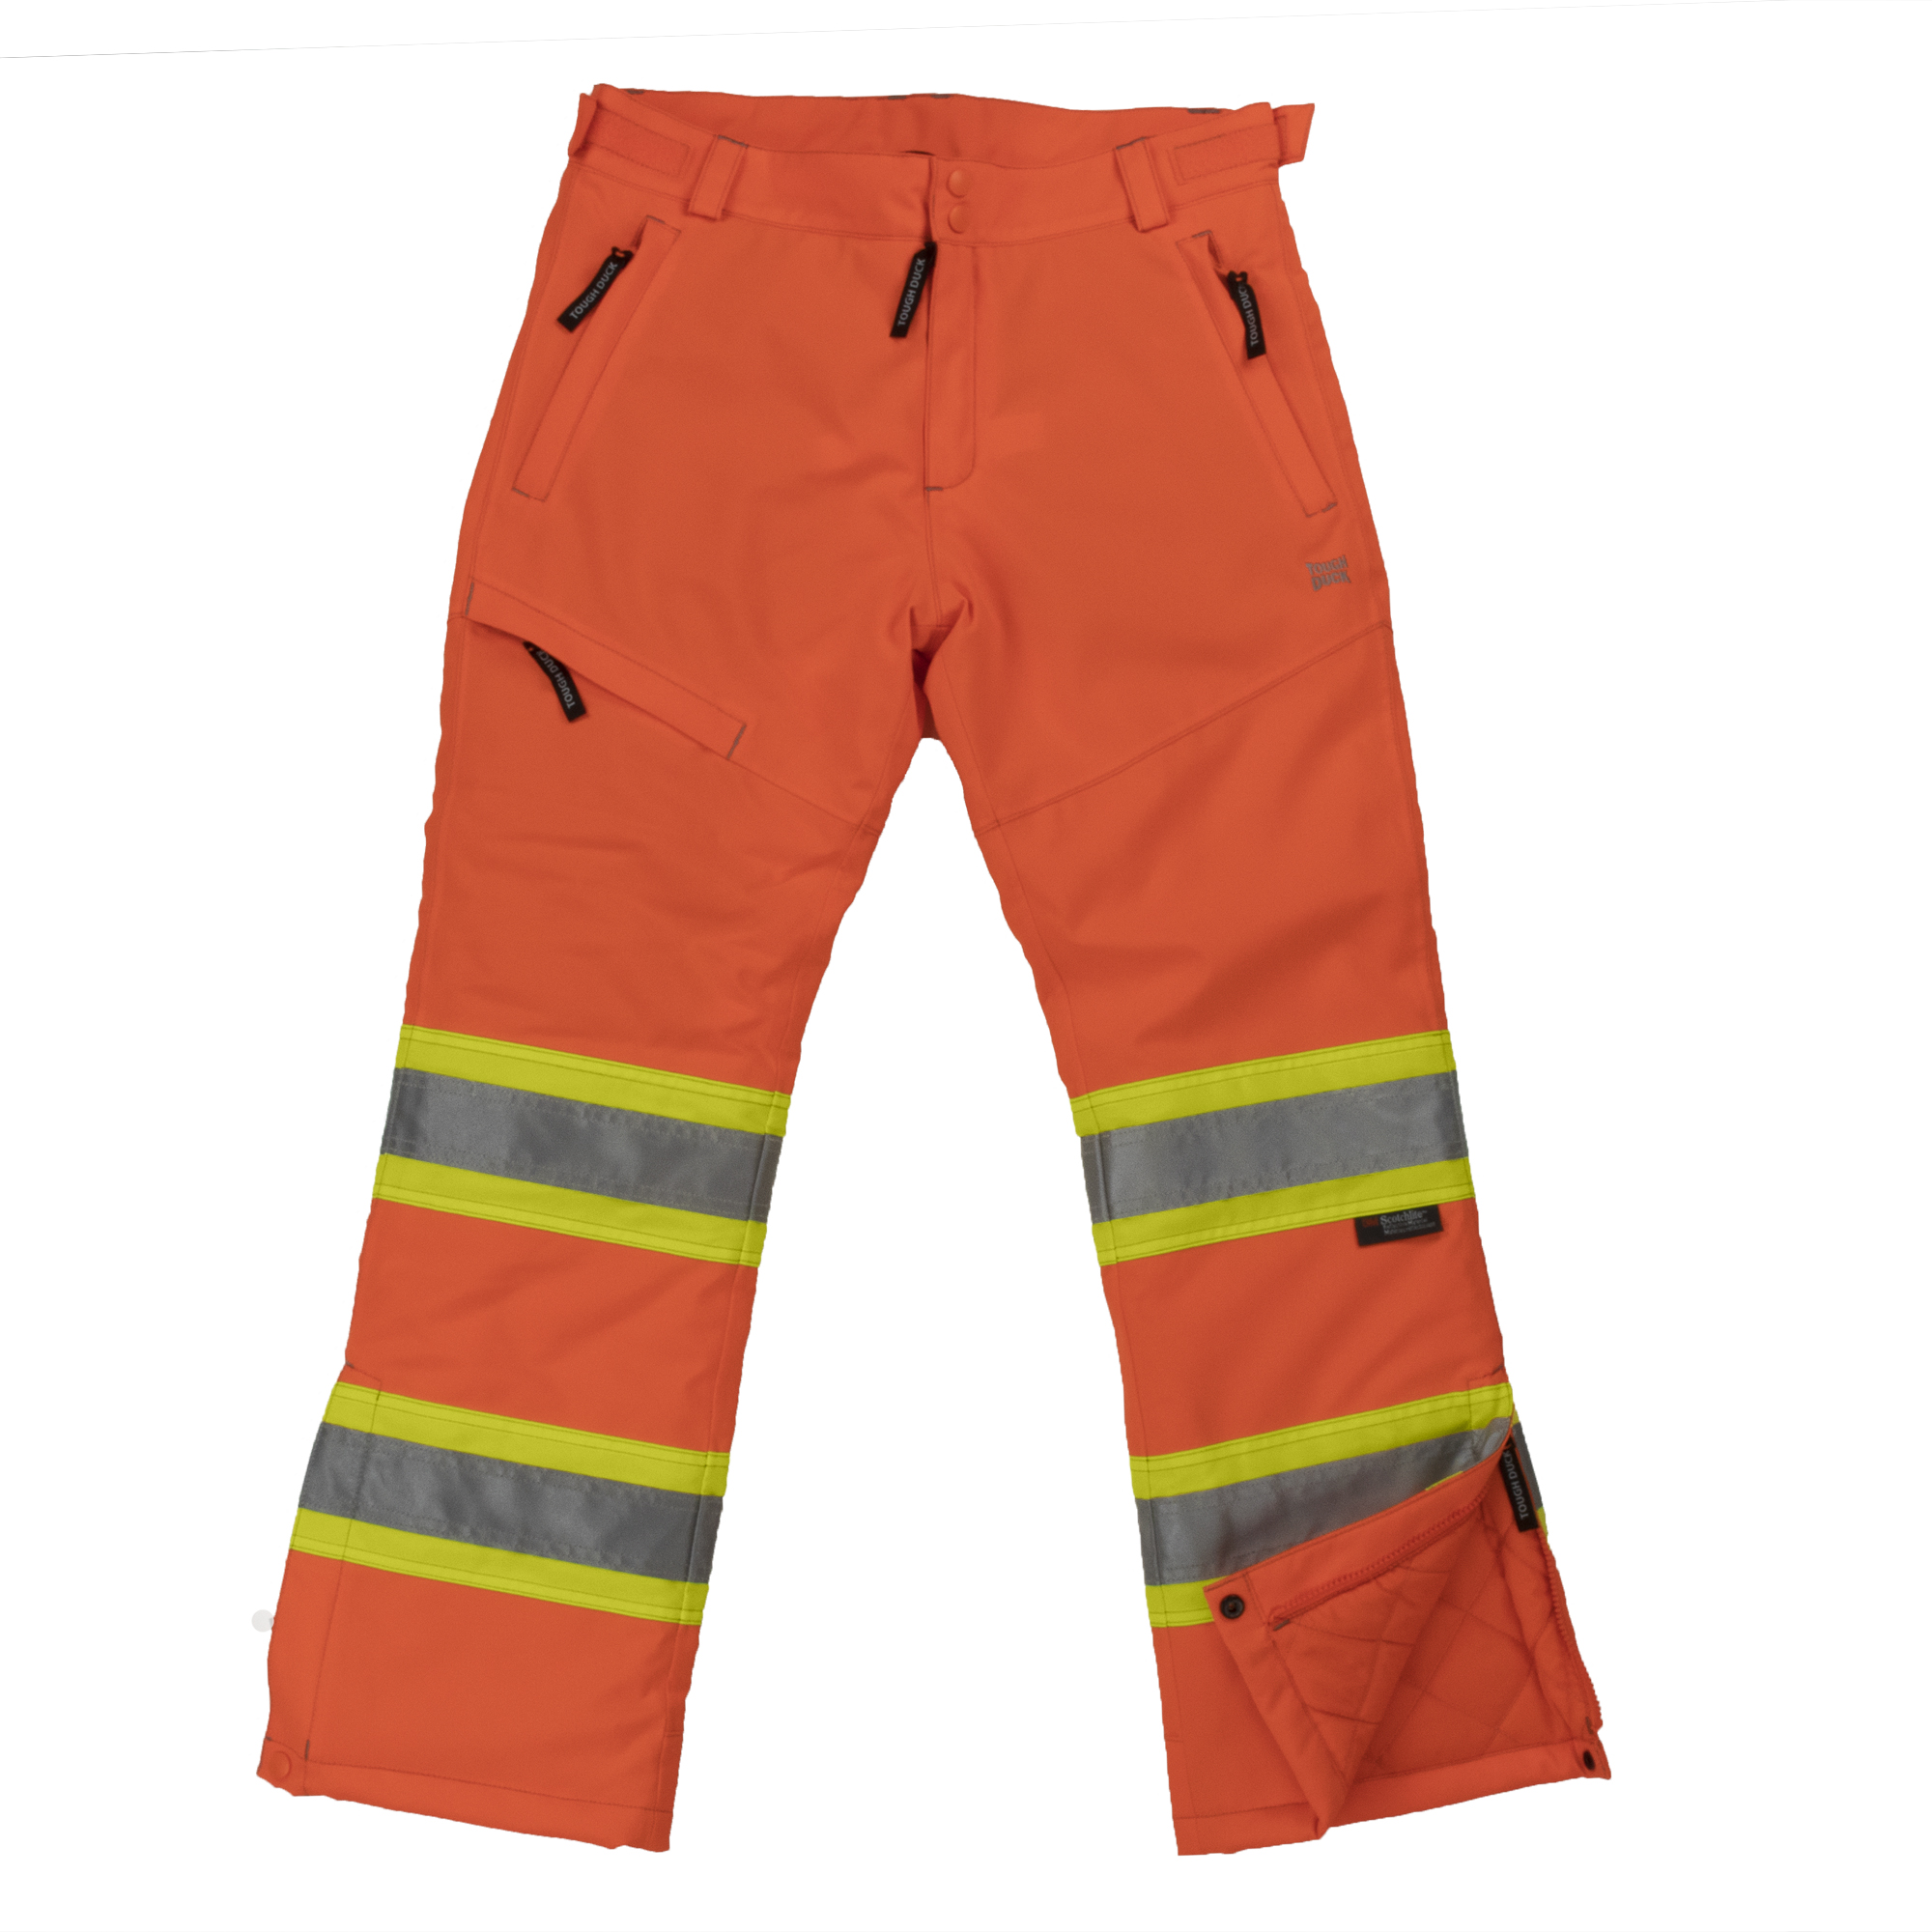 Women's Insulated Orange Safety Pants